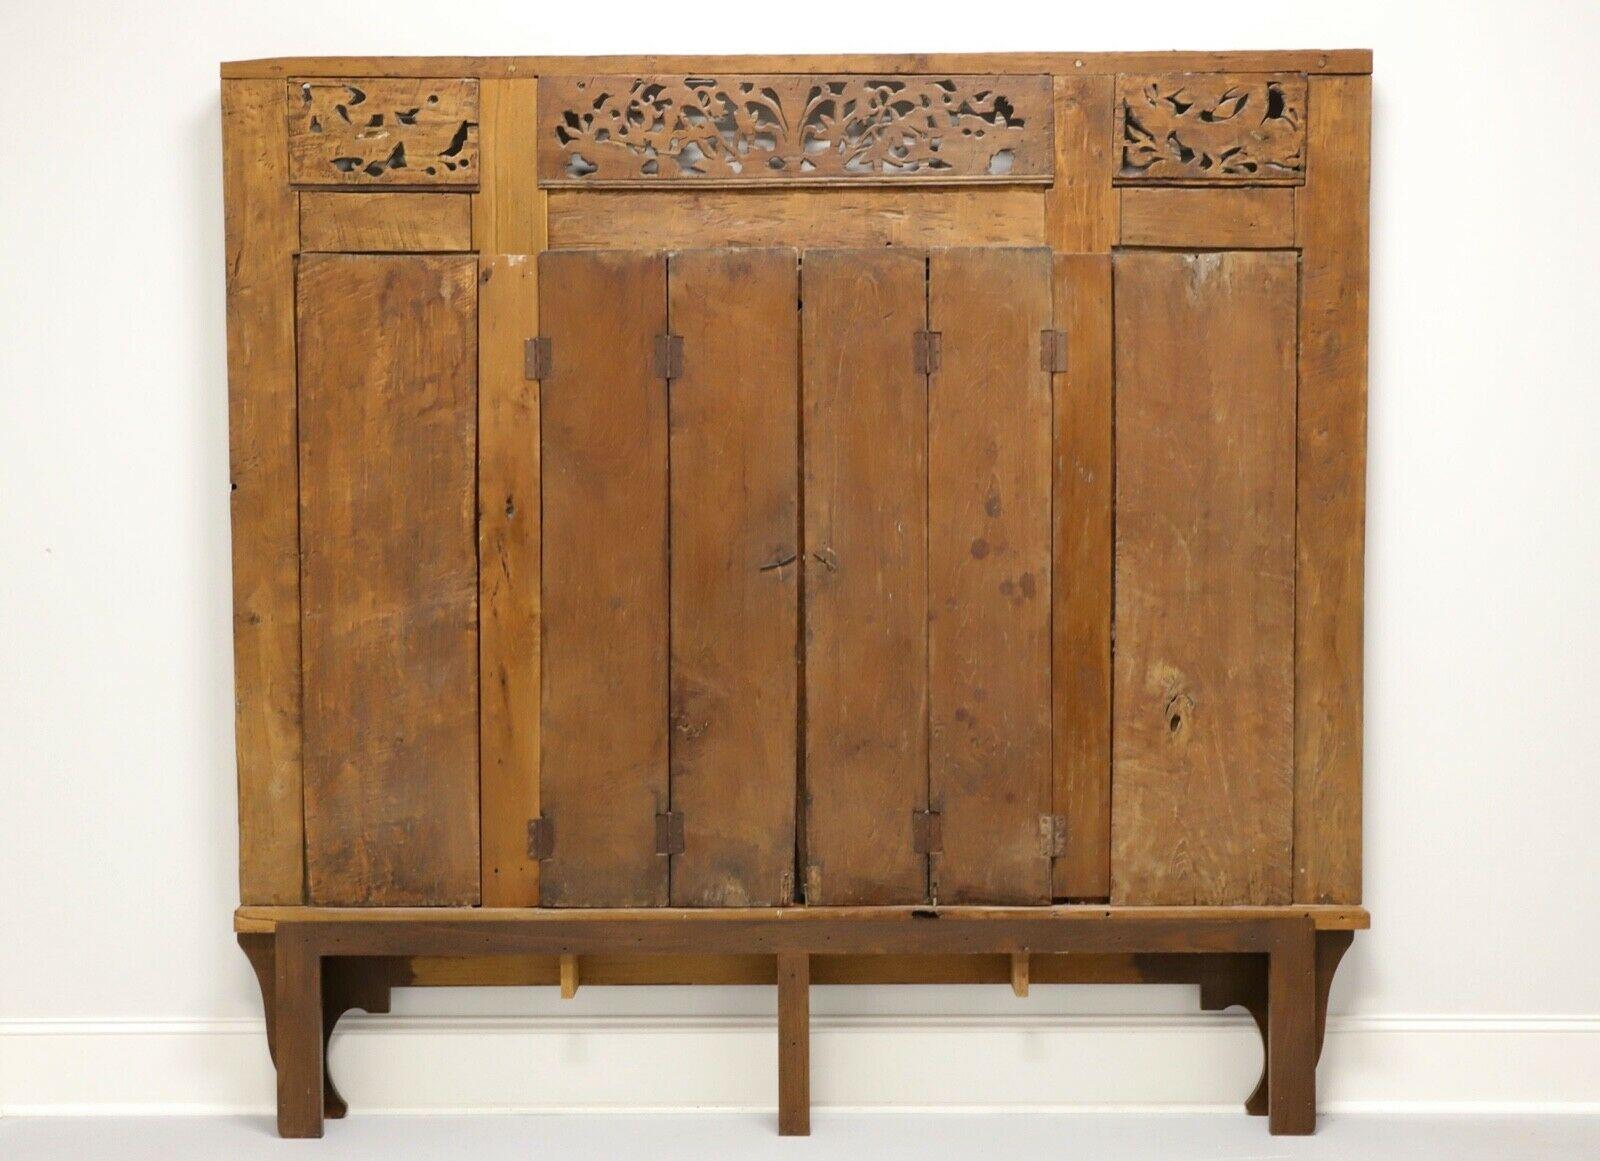 An antique Asian style Thai carved panel with doors and base, unbranded. Solid wood with intricately hand carved detail and center bi-fold doors with metal hardware. Made in Thailand in the late 19th Century. Could be used as king size headboard,